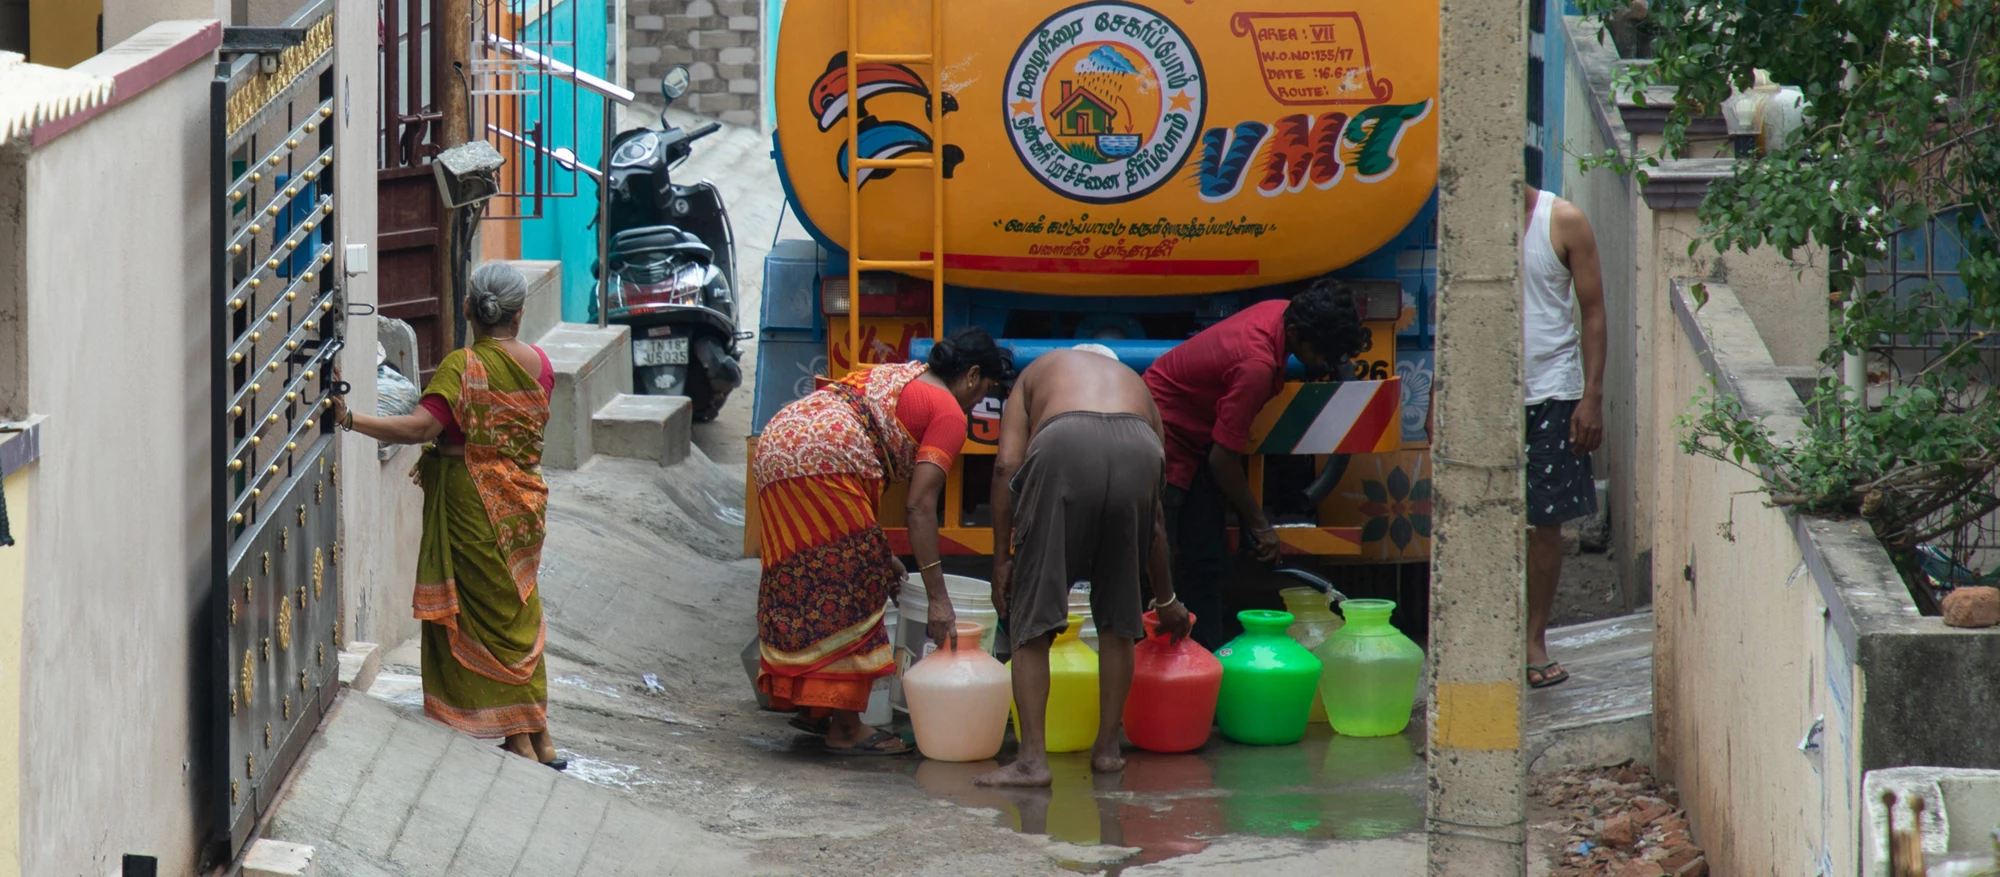 Since 2018, Chennai and its suburbs have obtained 50 to 60 percent of their water from private water tankers. Photo: Shutterstock 